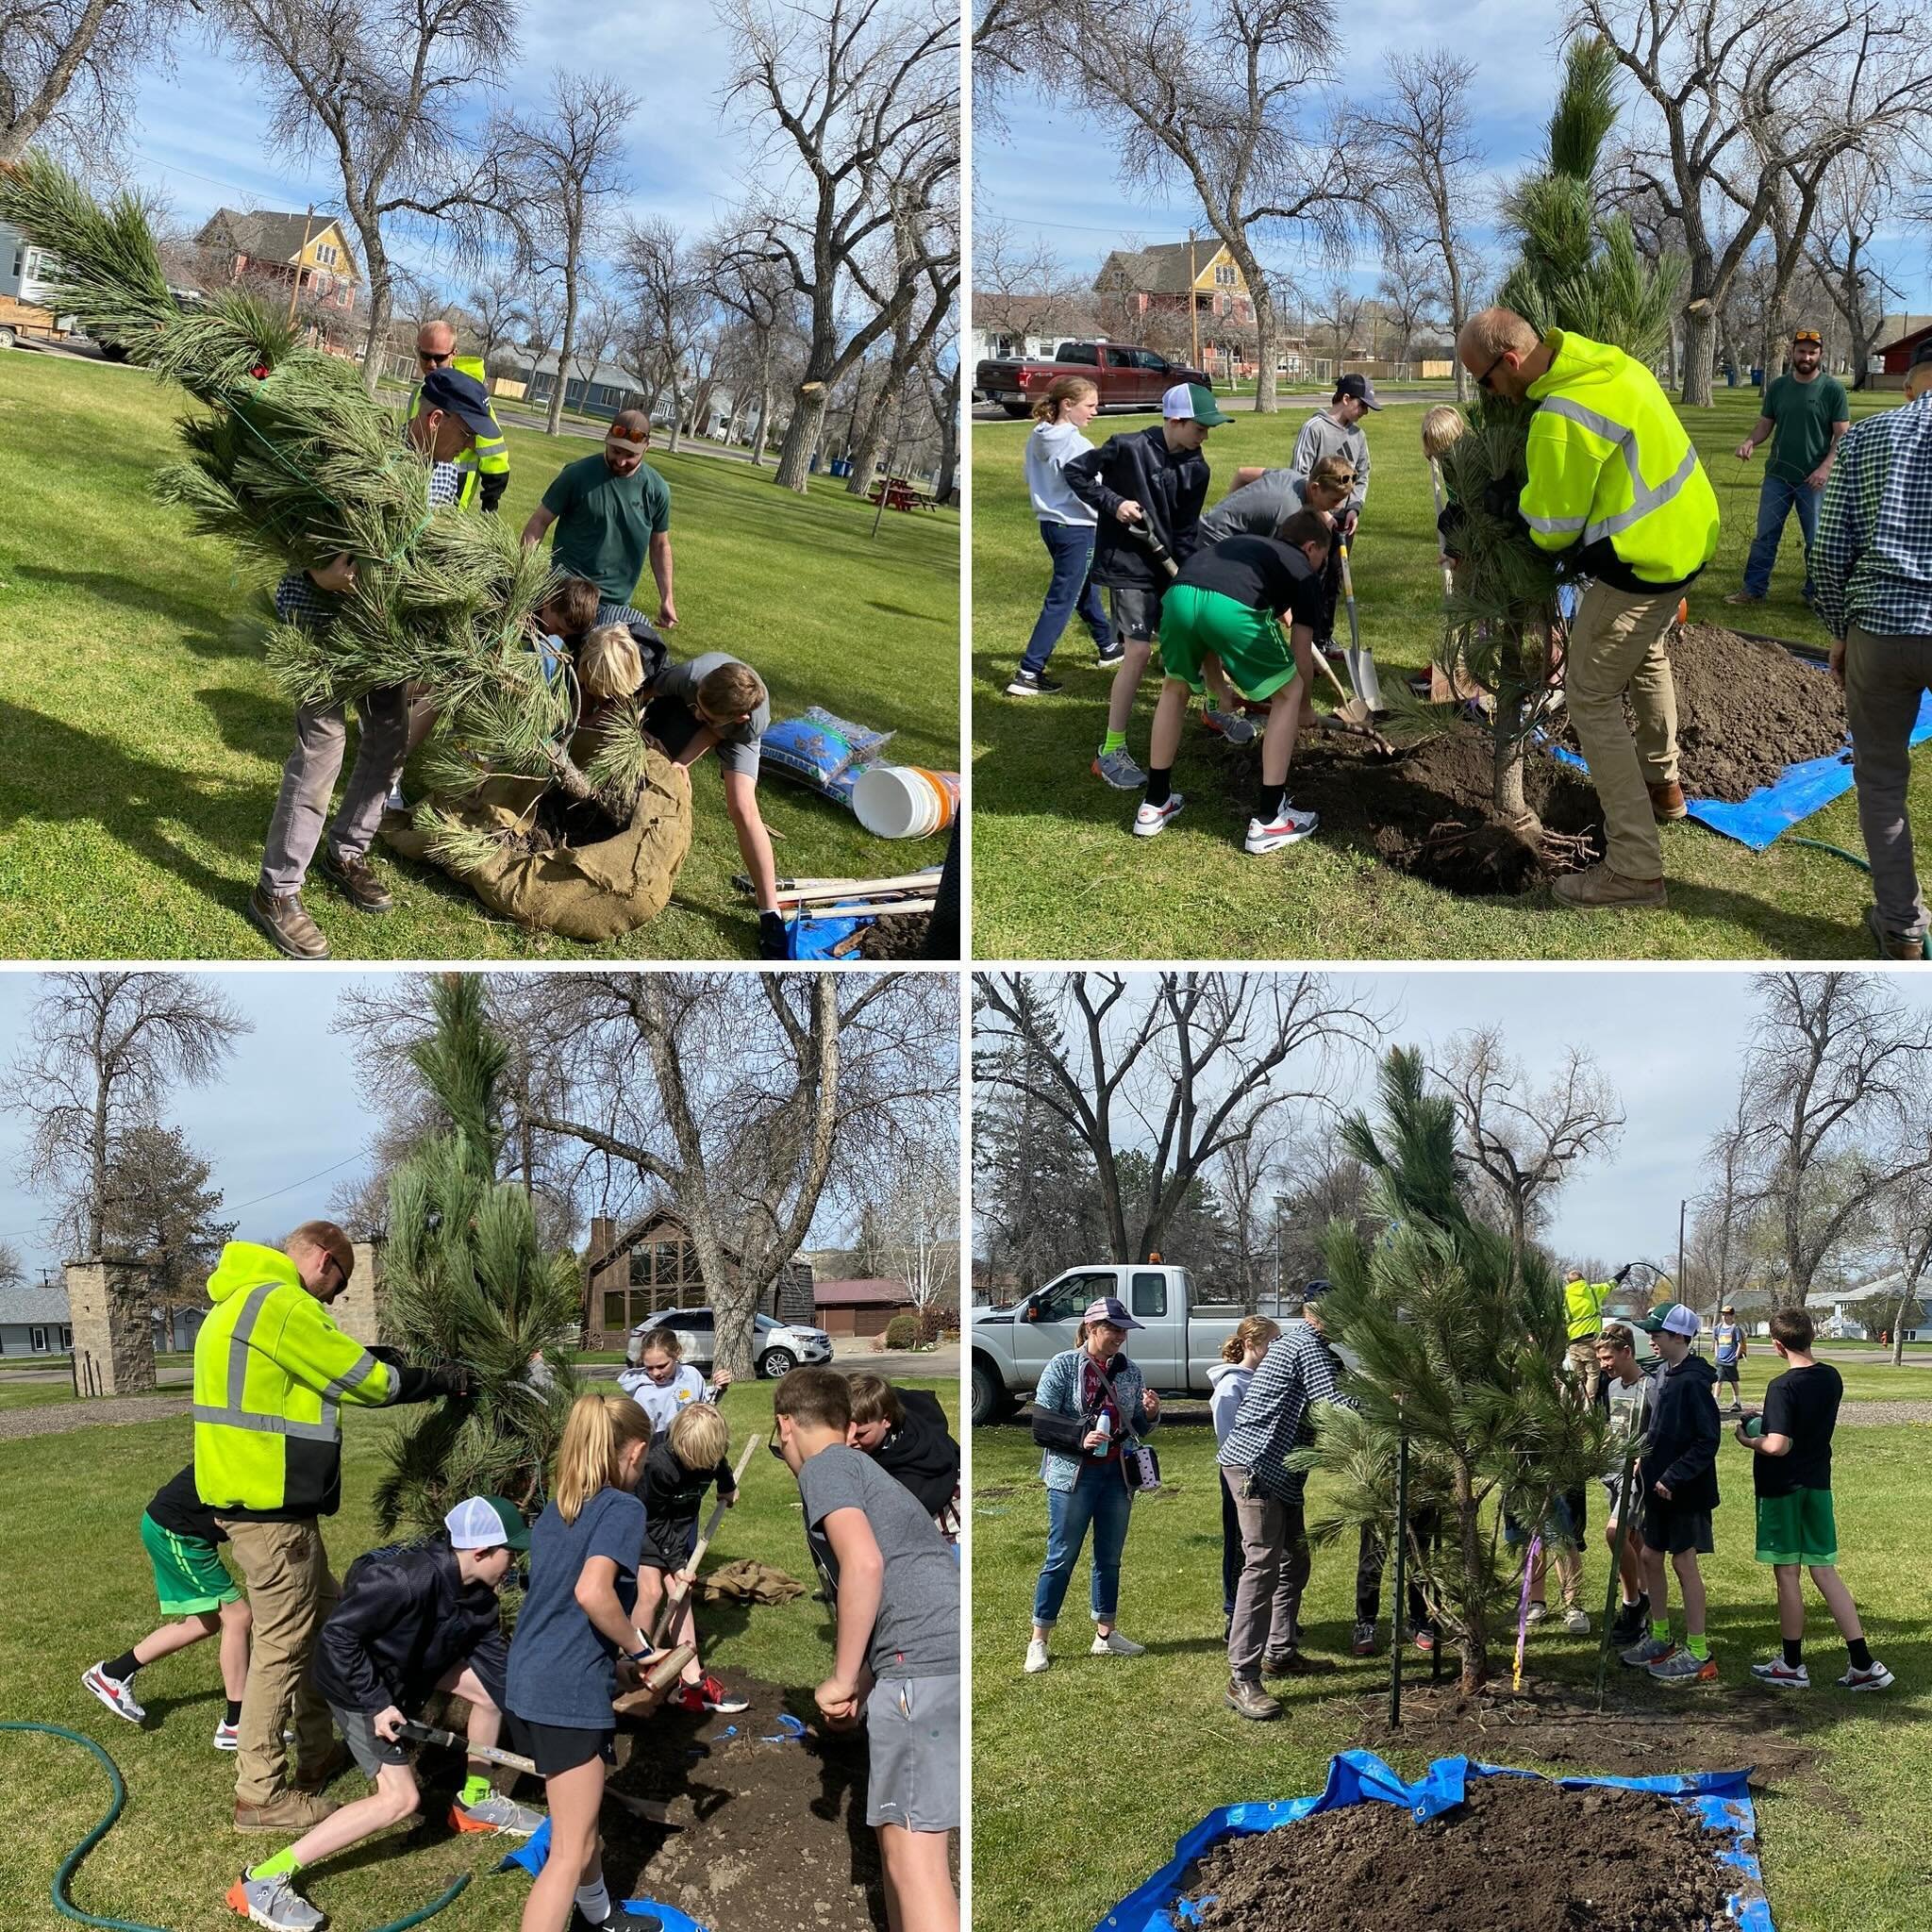 The future starts here
Planting trees for tomorrow 
Arbor Day observed

#nationalpoetrymonth #haikuaday #haiku #fivesevenfive #nature #time #fortbentonlibrary #fortbentonmontana #fortbenton #chouteaucounty #montana